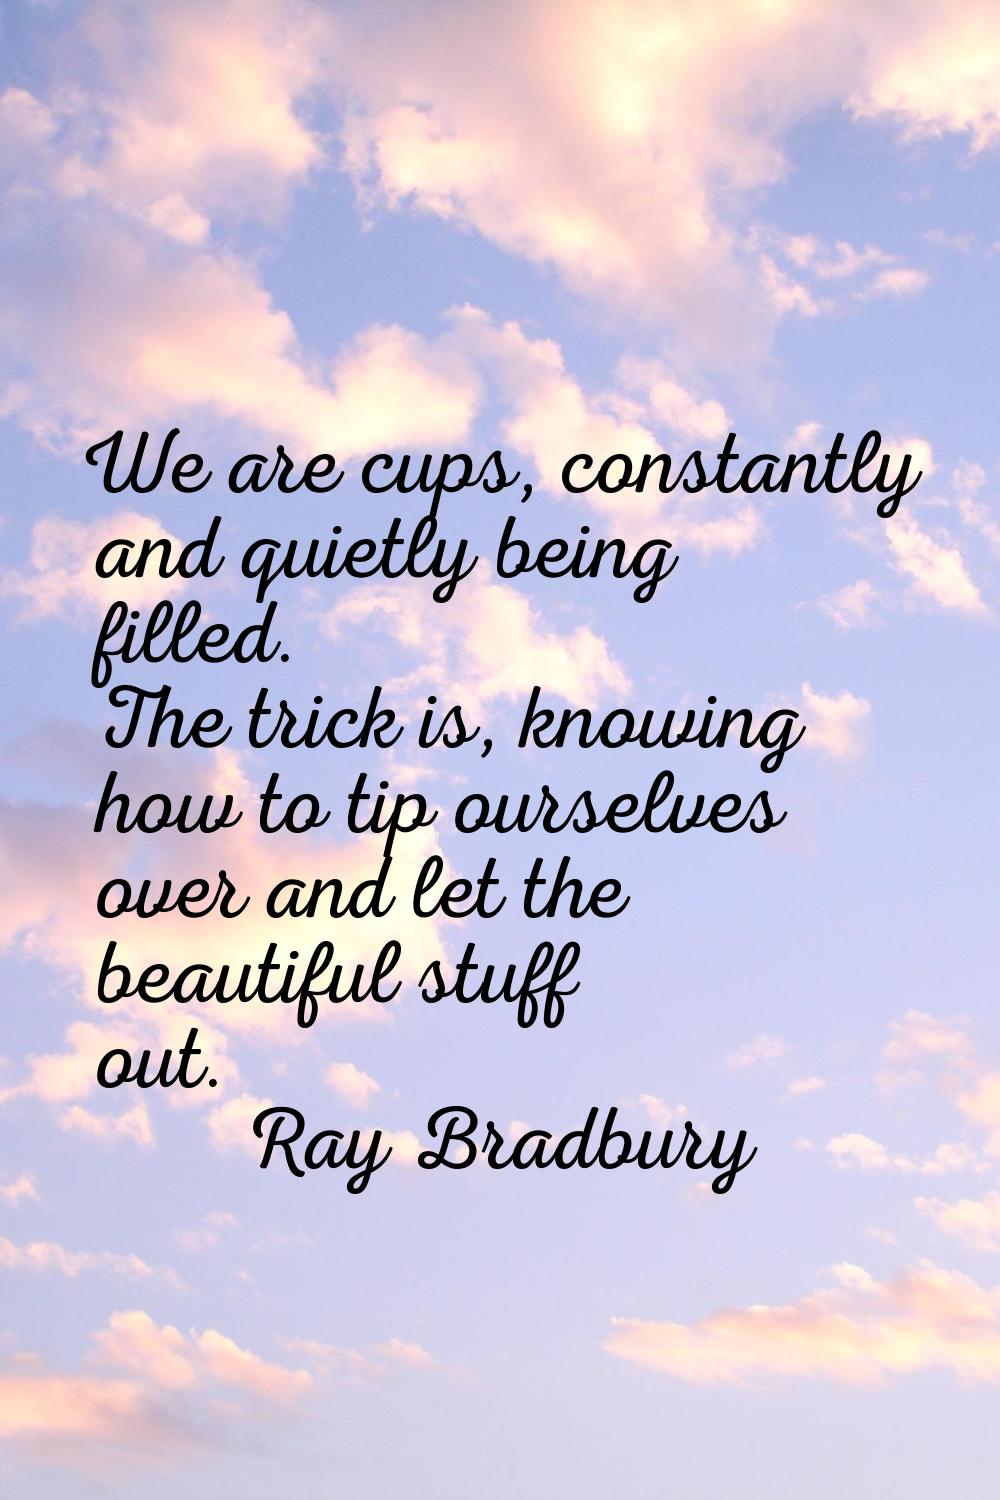 We are cups, constantly and quietly being filled. The trick is, knowing how to tip ourselves over a